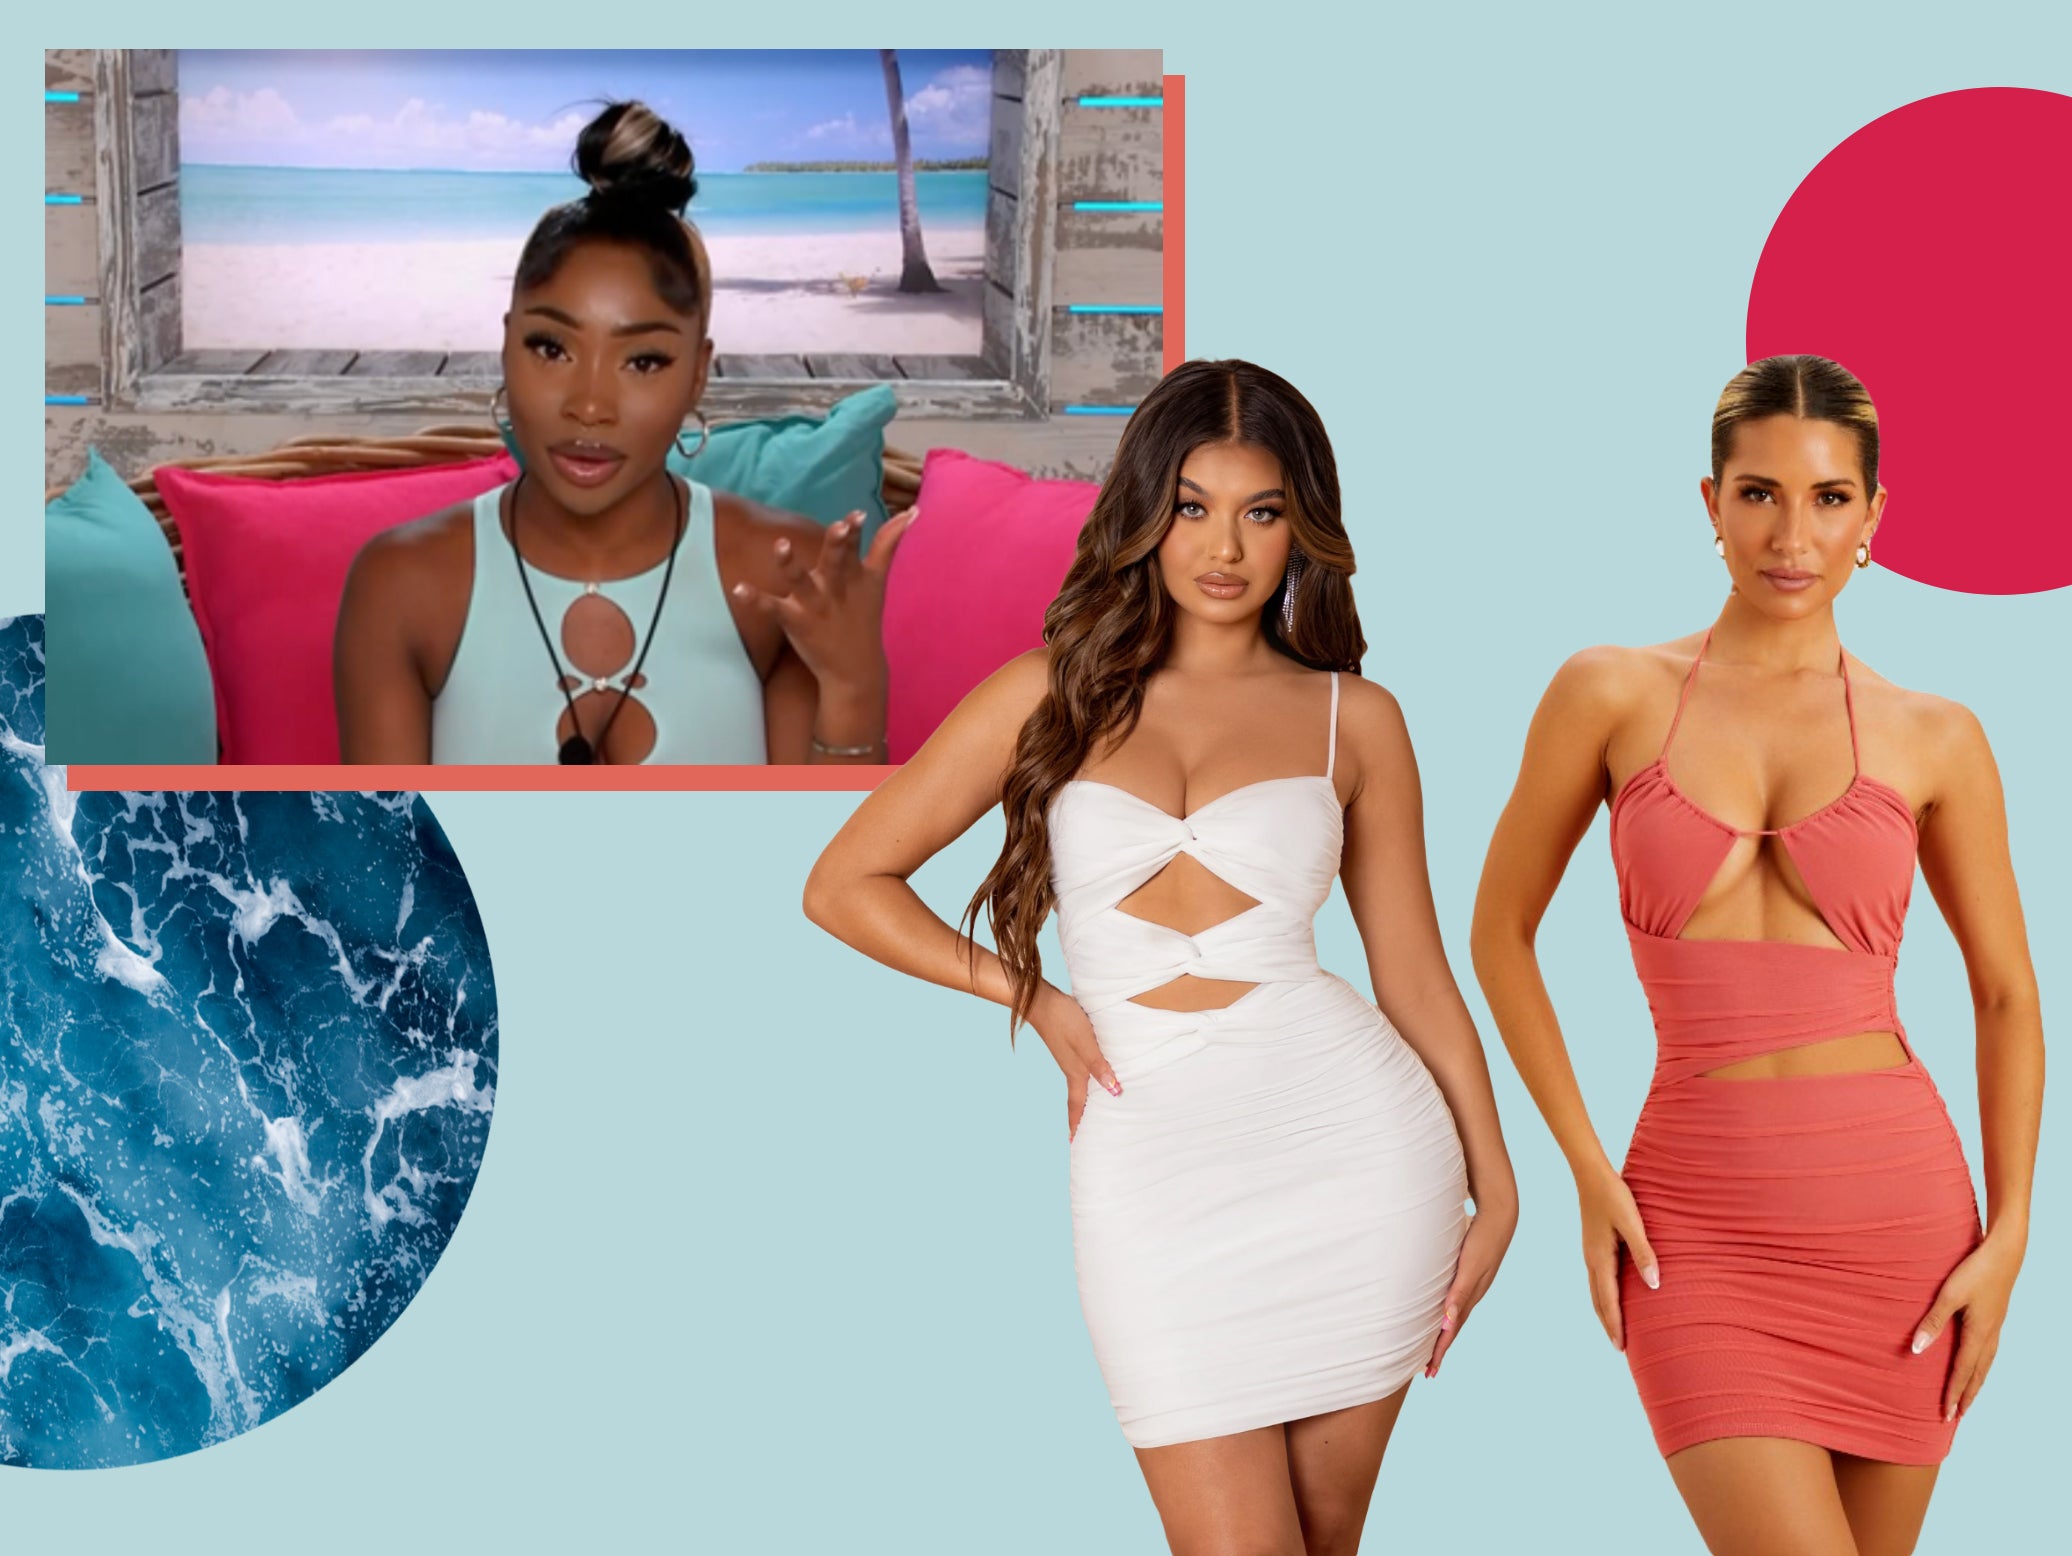 This week’s hottest trend on the show is cut out dresses